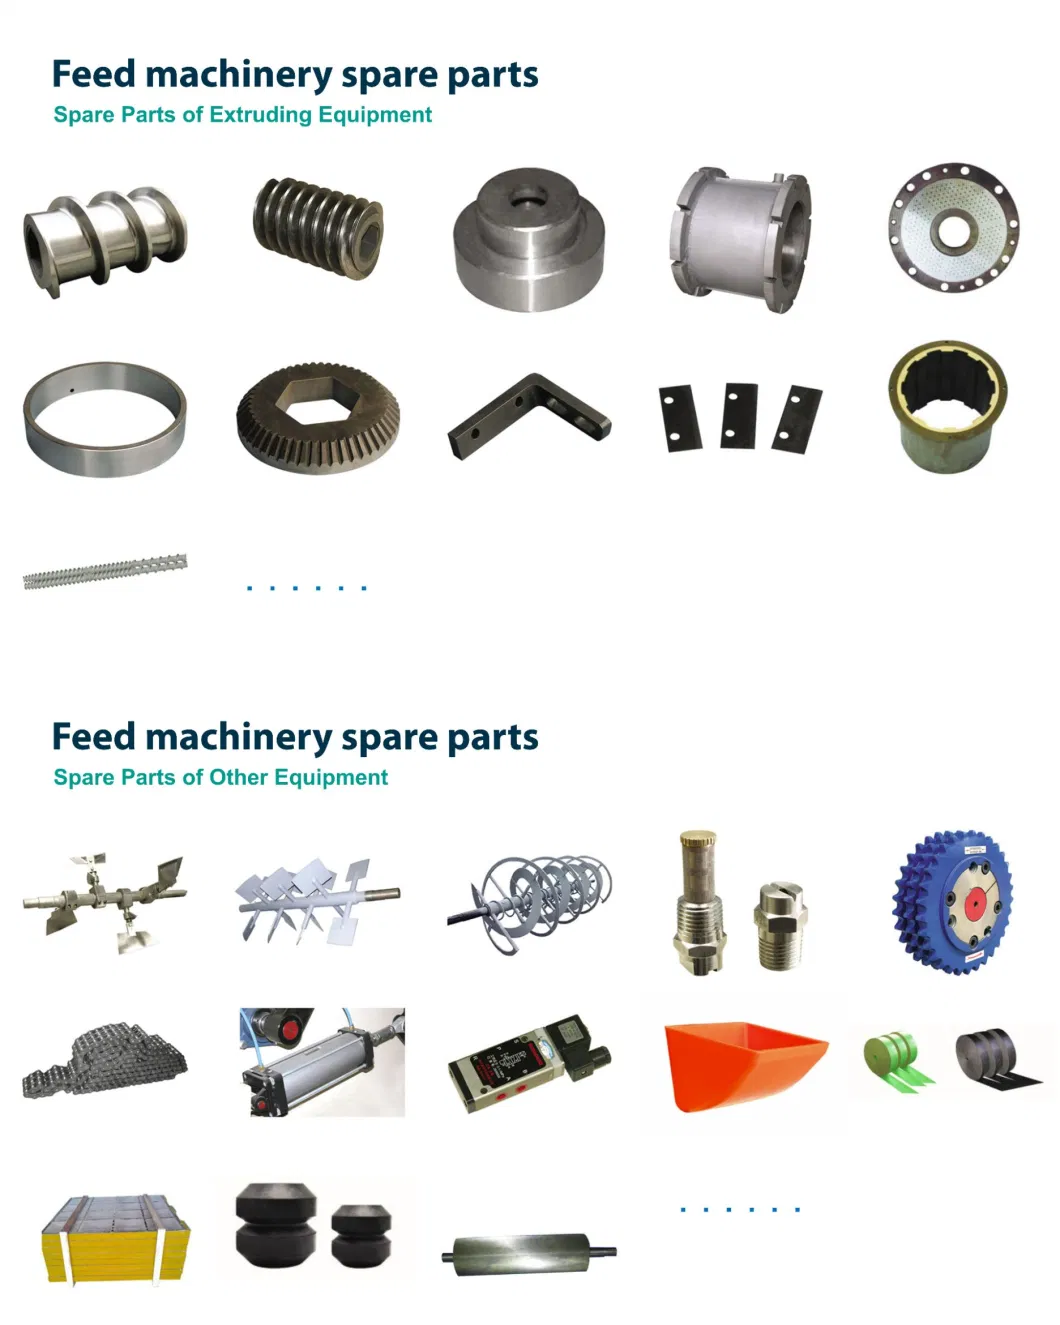 Famsun (Muyang) K50 (SZLH885*330) Pellet Machine Stainless Steel X46cr13 (4Cr13) Ring Die in Feed Processing Machinery Spare Parts